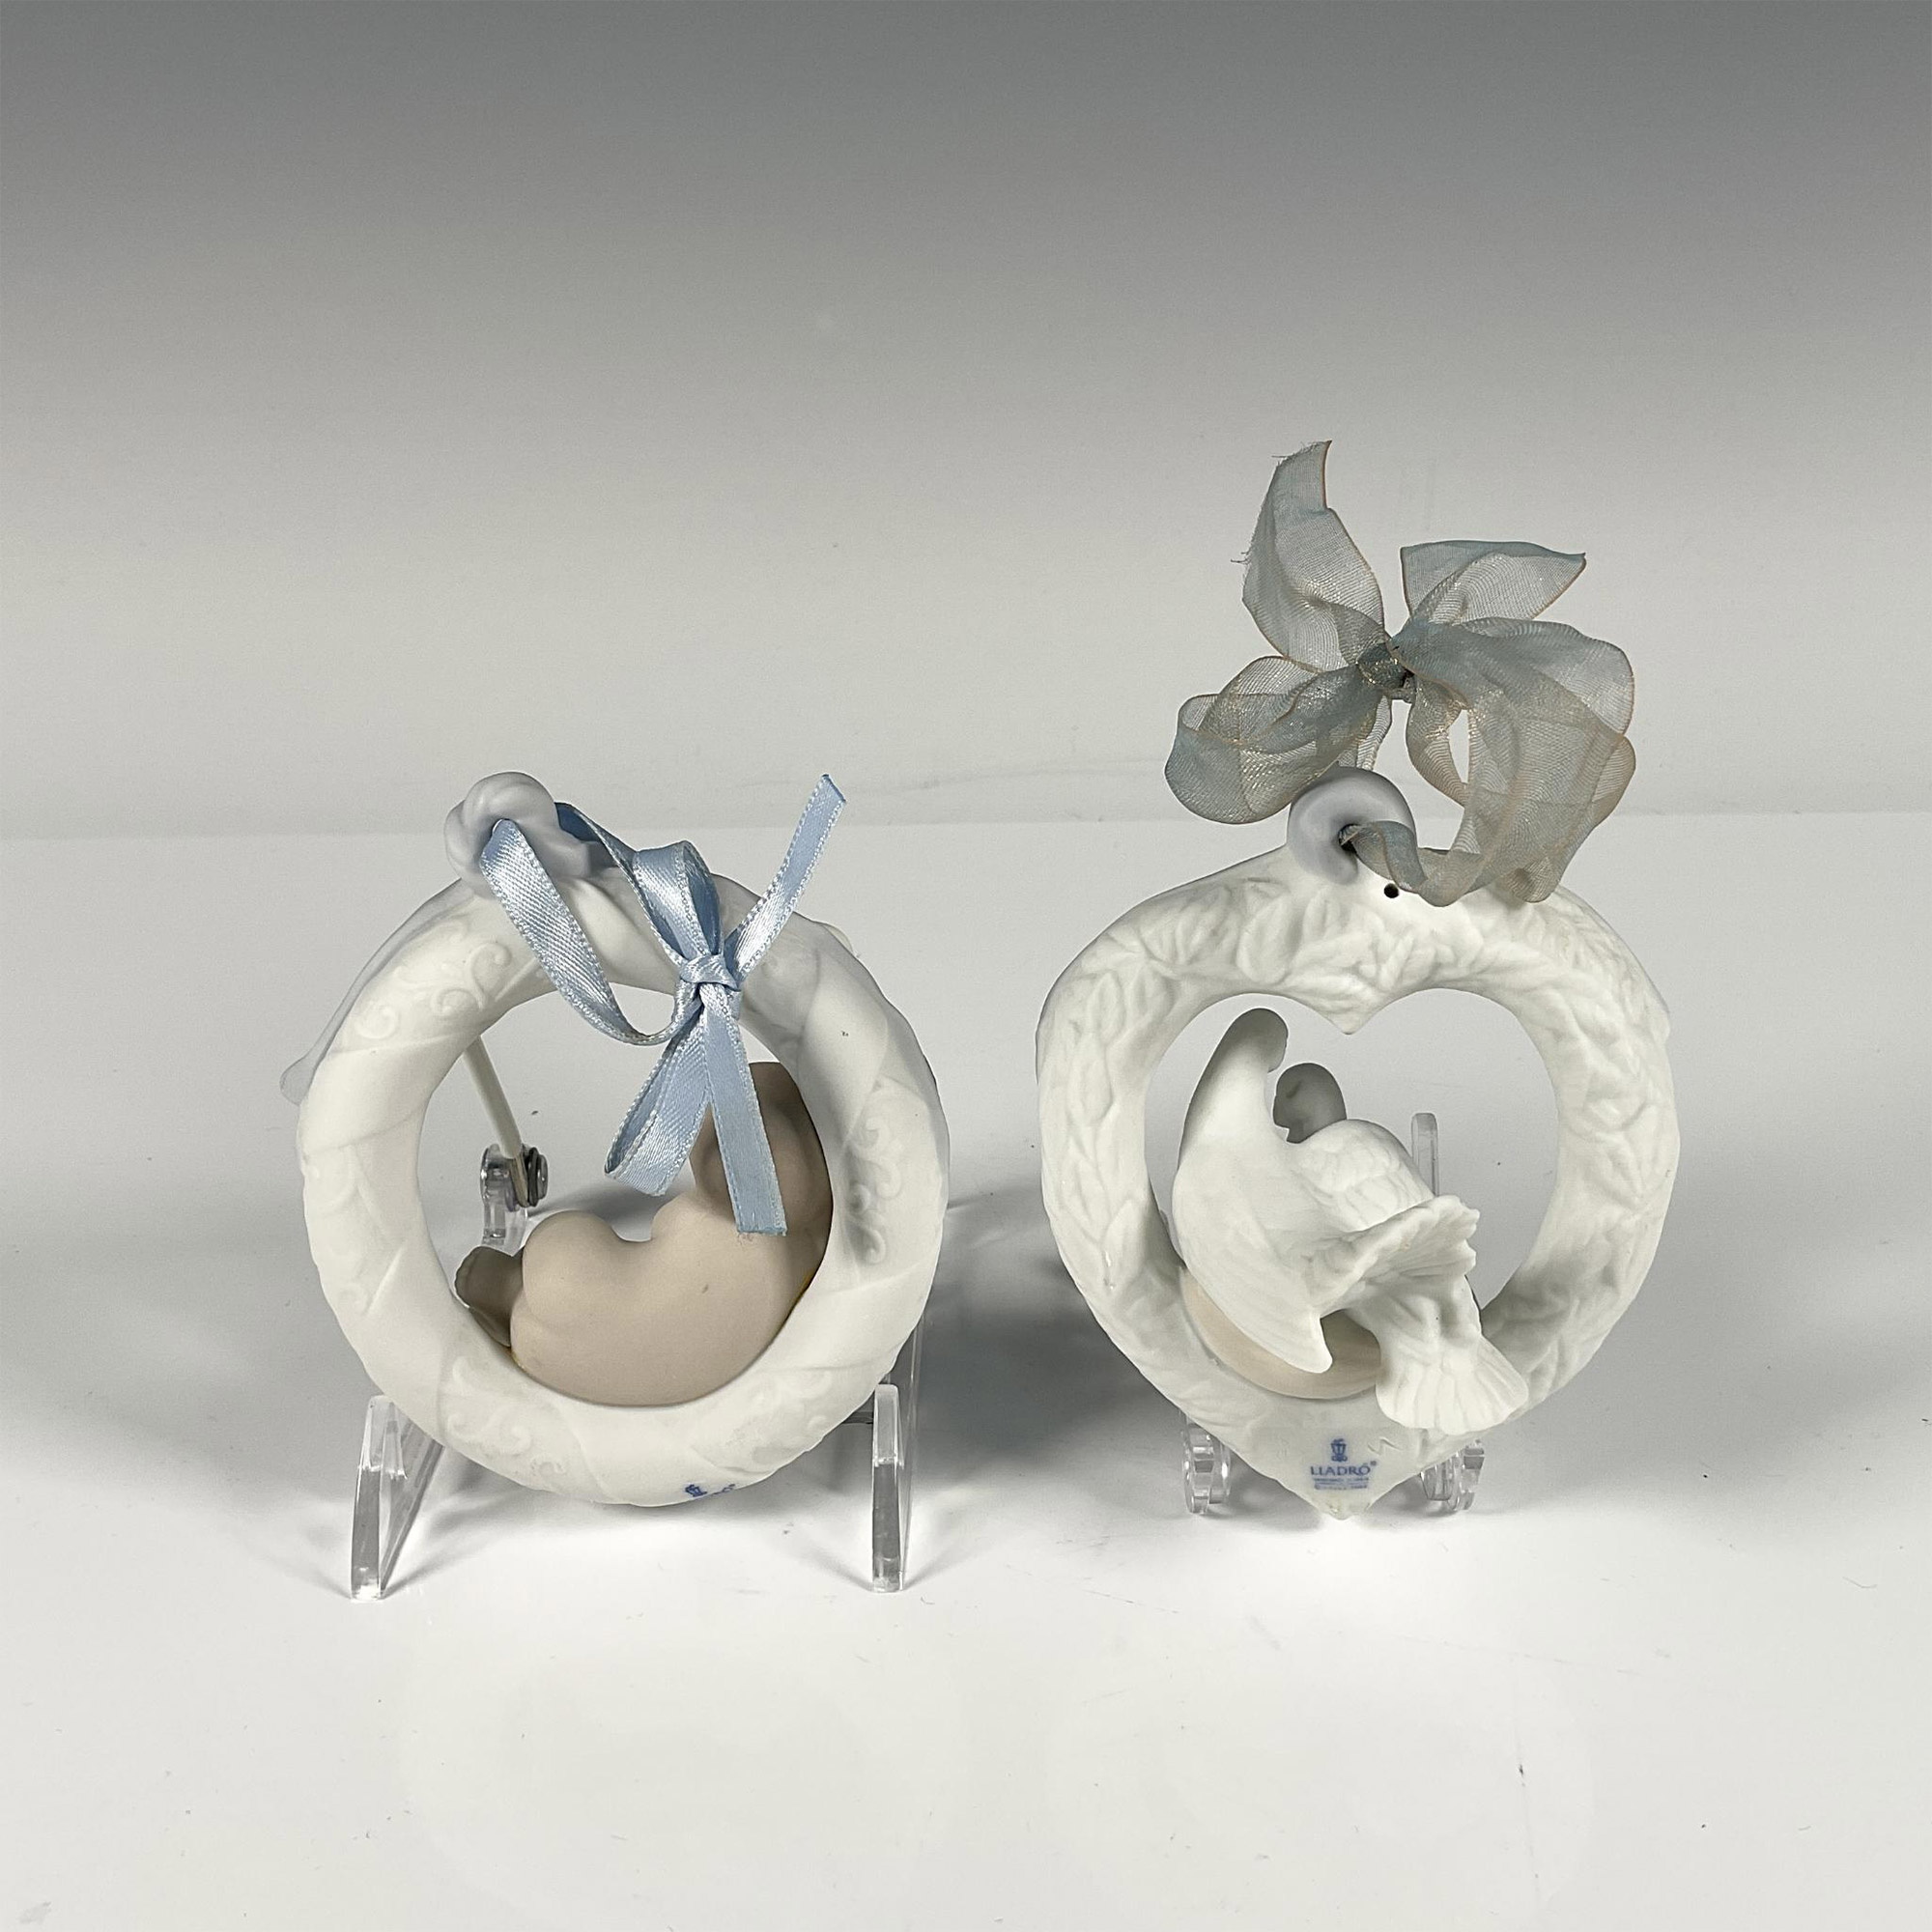 Pair of Lladro Porcelain 2001 and 2005 Christmas Ornaments - Image 2 of 3